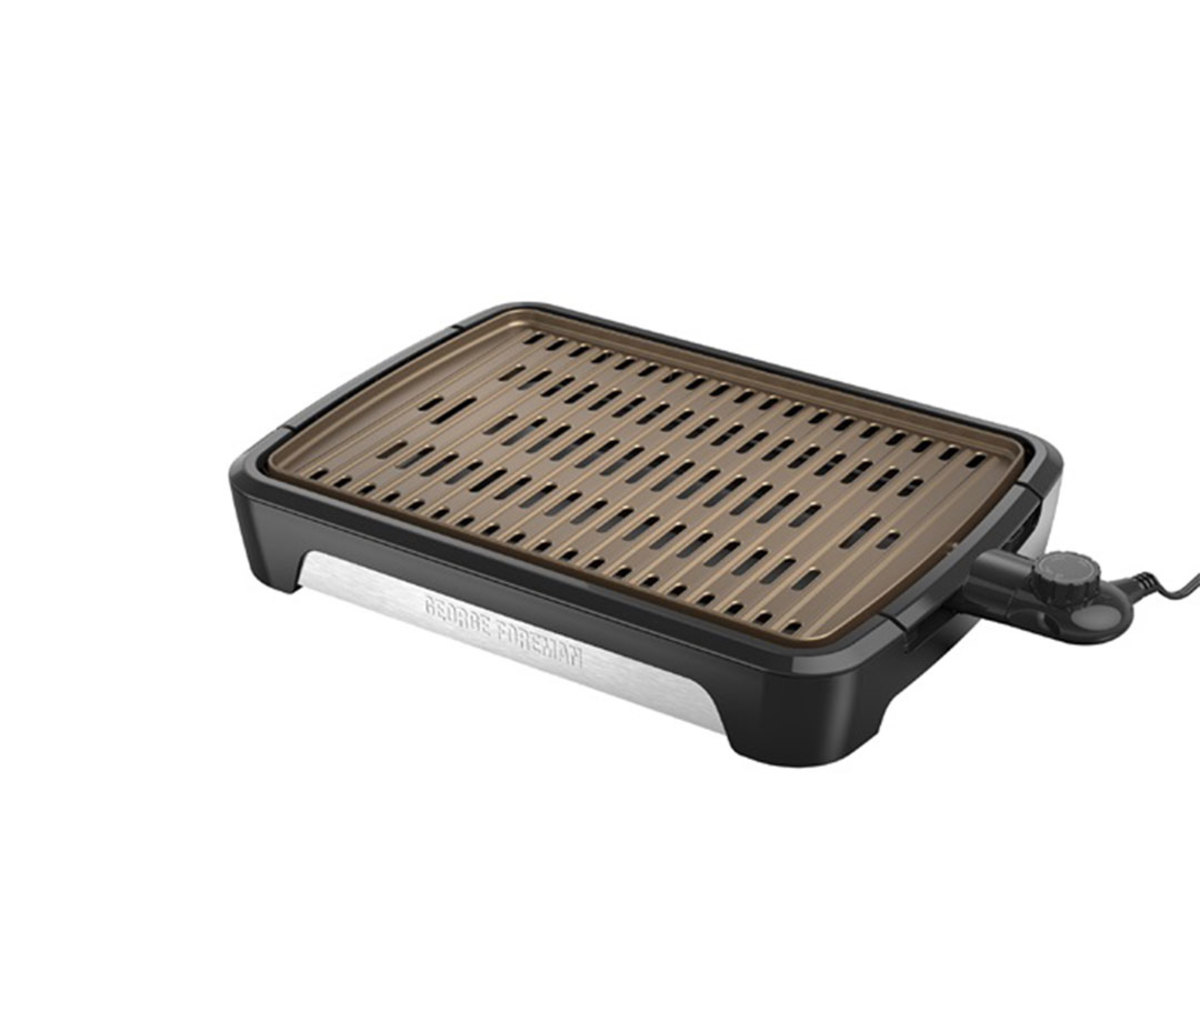 George Foreman Open Grate Smokeless Grill